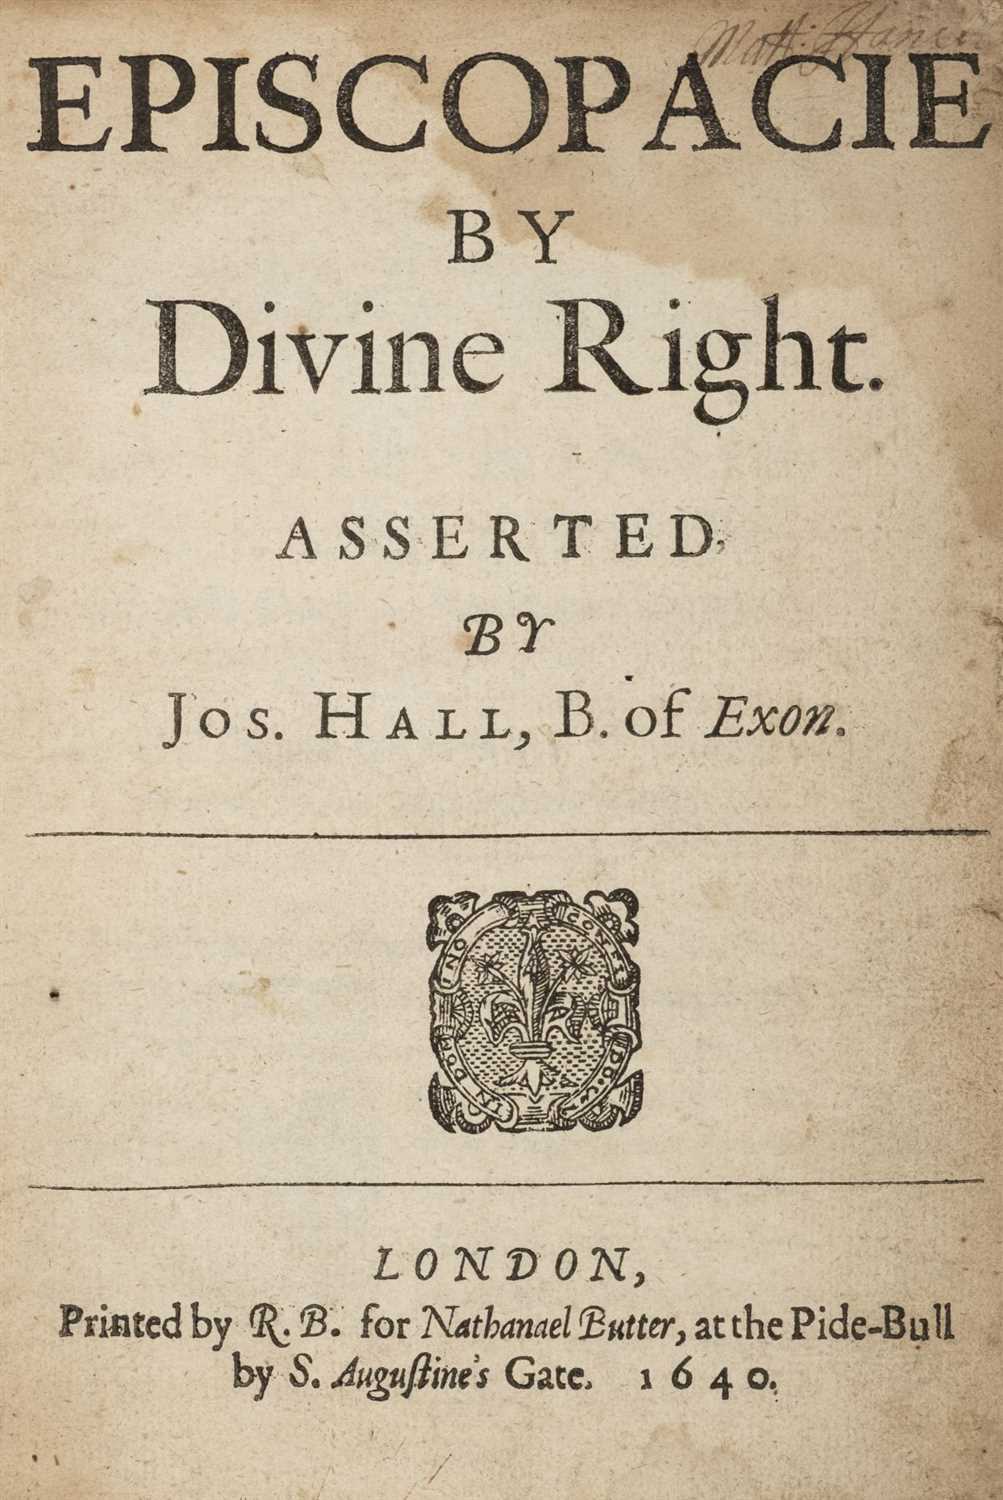 Lot 274 - Hall (Joseph). Episcopacie by Divine Right, 1640